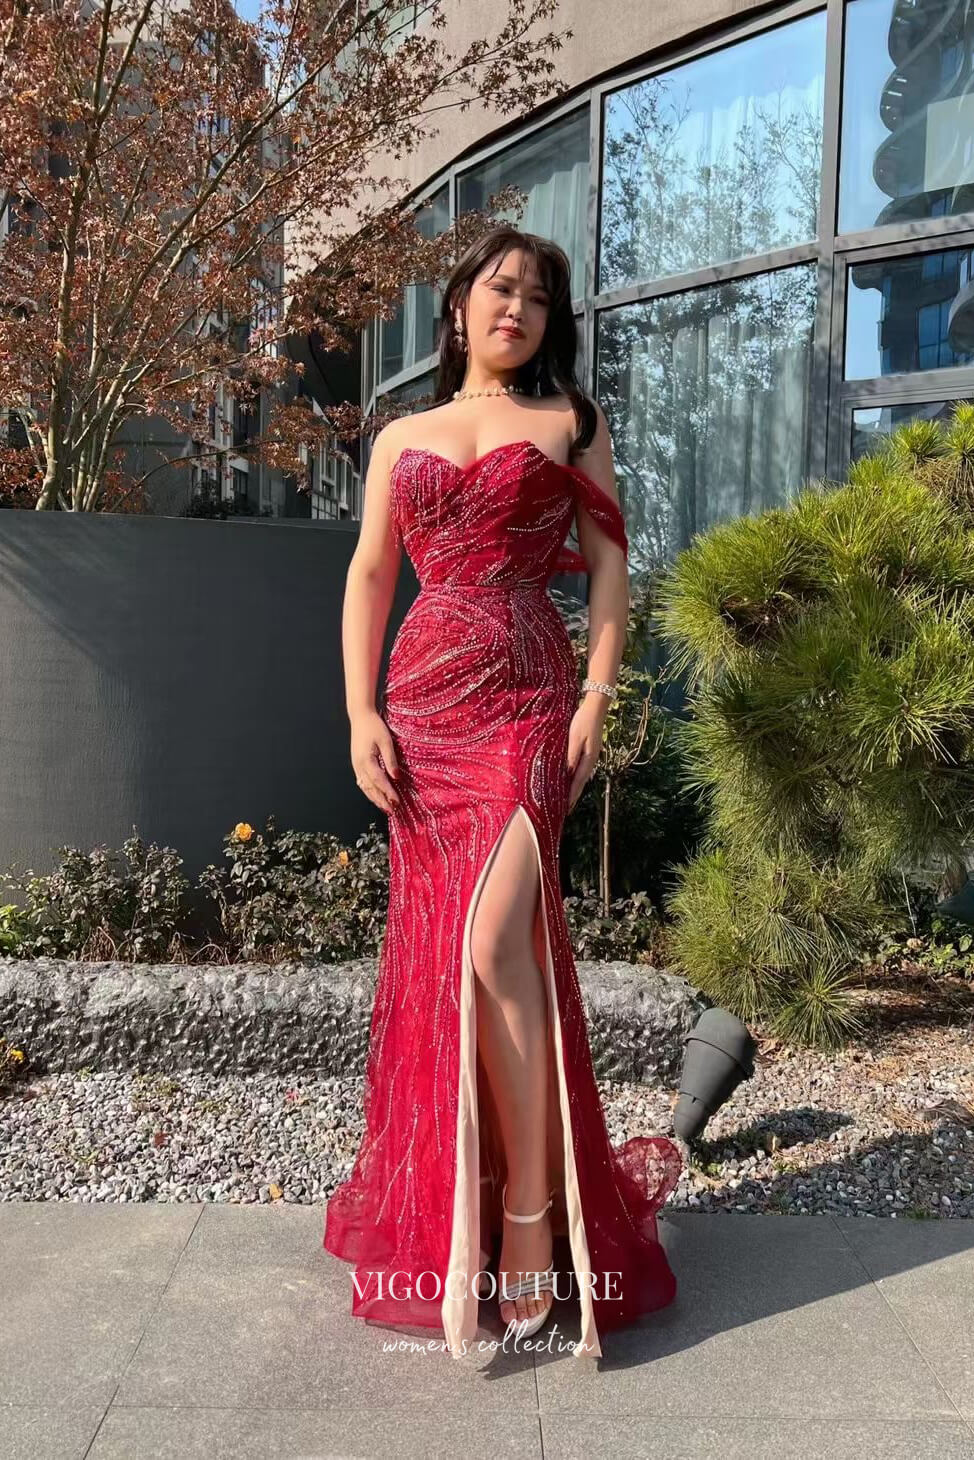 Shimmering Red Beaded Mermaid Prom Dress with Sweetheart Neck and High Slit 22248-Prom Dresses-vigocouture-Red-US2-vigocouture